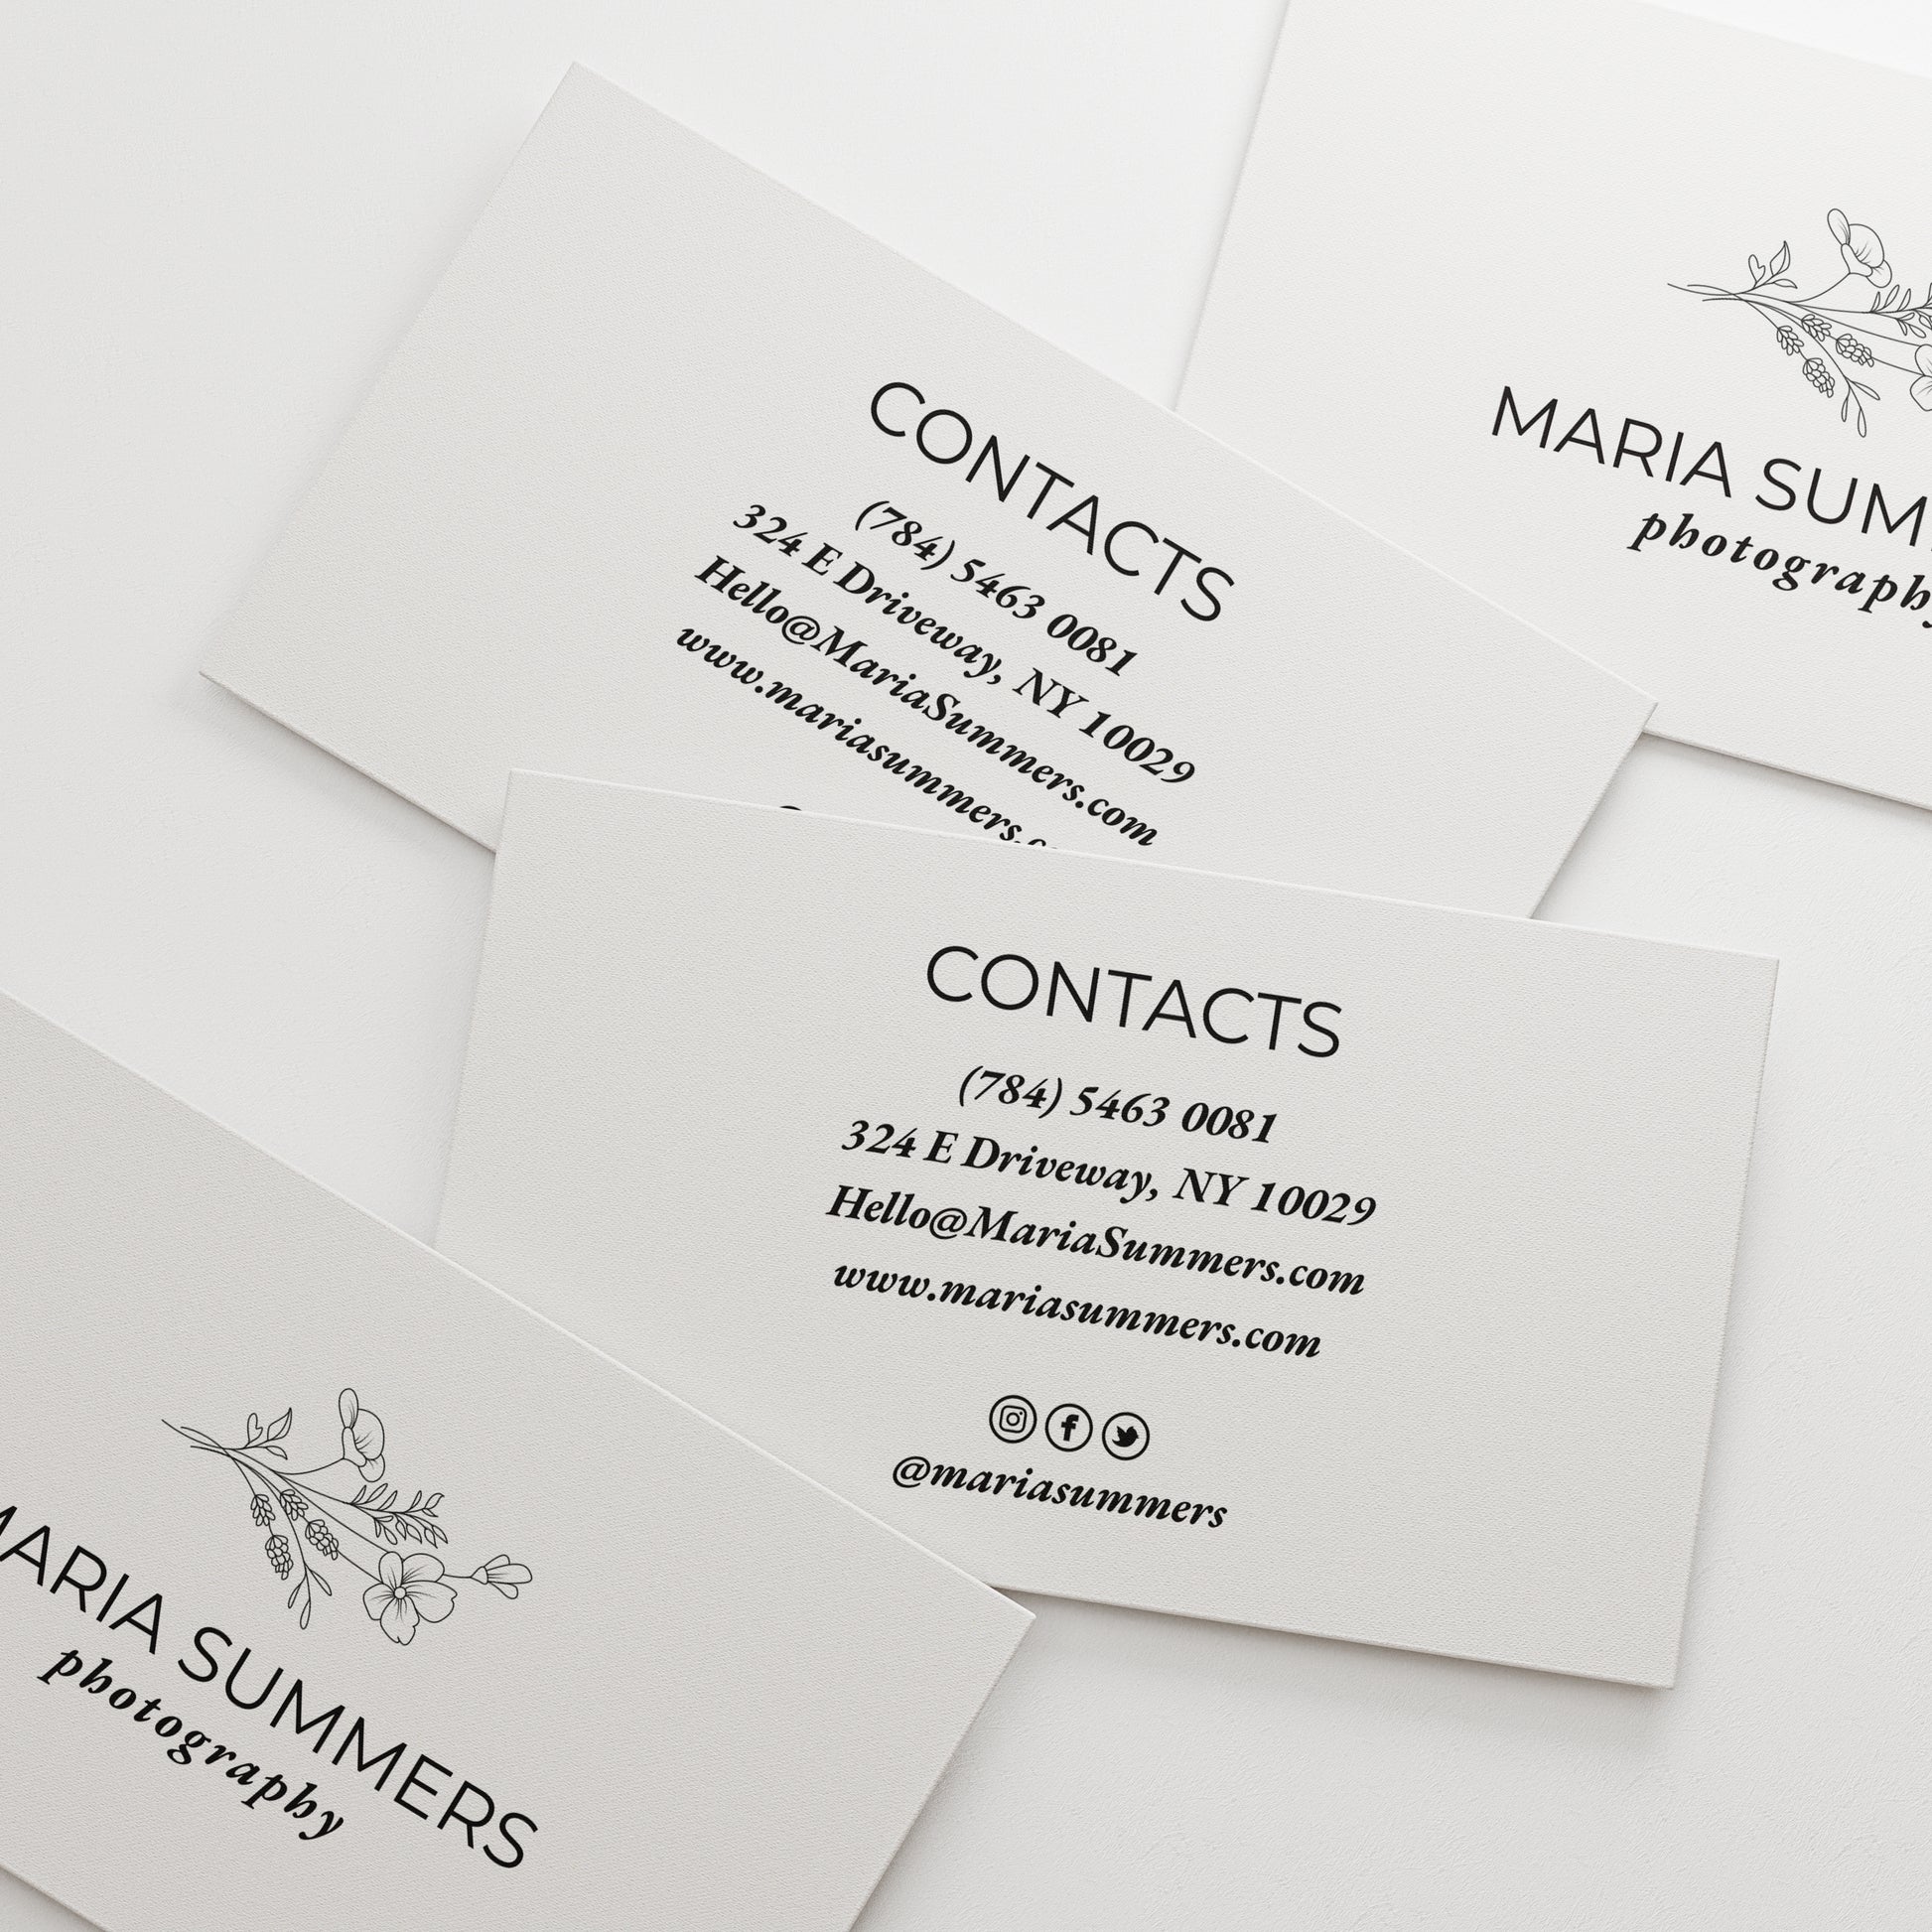 Sleek black and white personalized business cards from XOXOKristen, showcasing a floral illustration and a variety of luxurious text printing options.